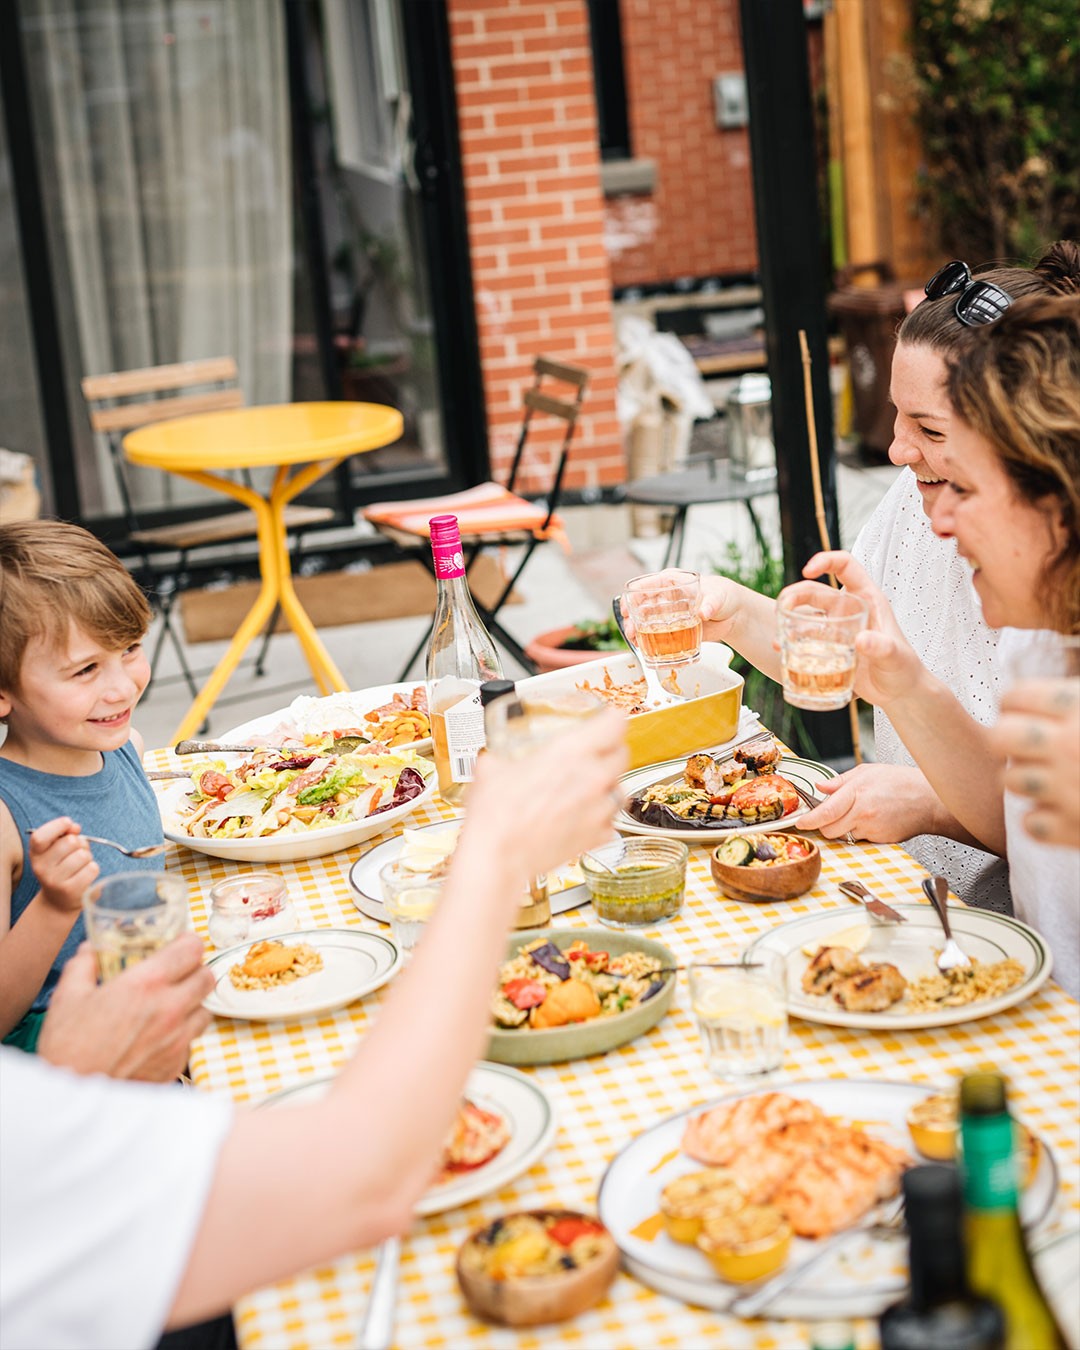 Be in a rush? That’s a big no. It’s no big secret, but if you really want to immerse yourself in the traditions of Italy, this is the key. Meals are considered family time, an opportunity to get together and enjoy one another’s company while maintaining close ties with the community.